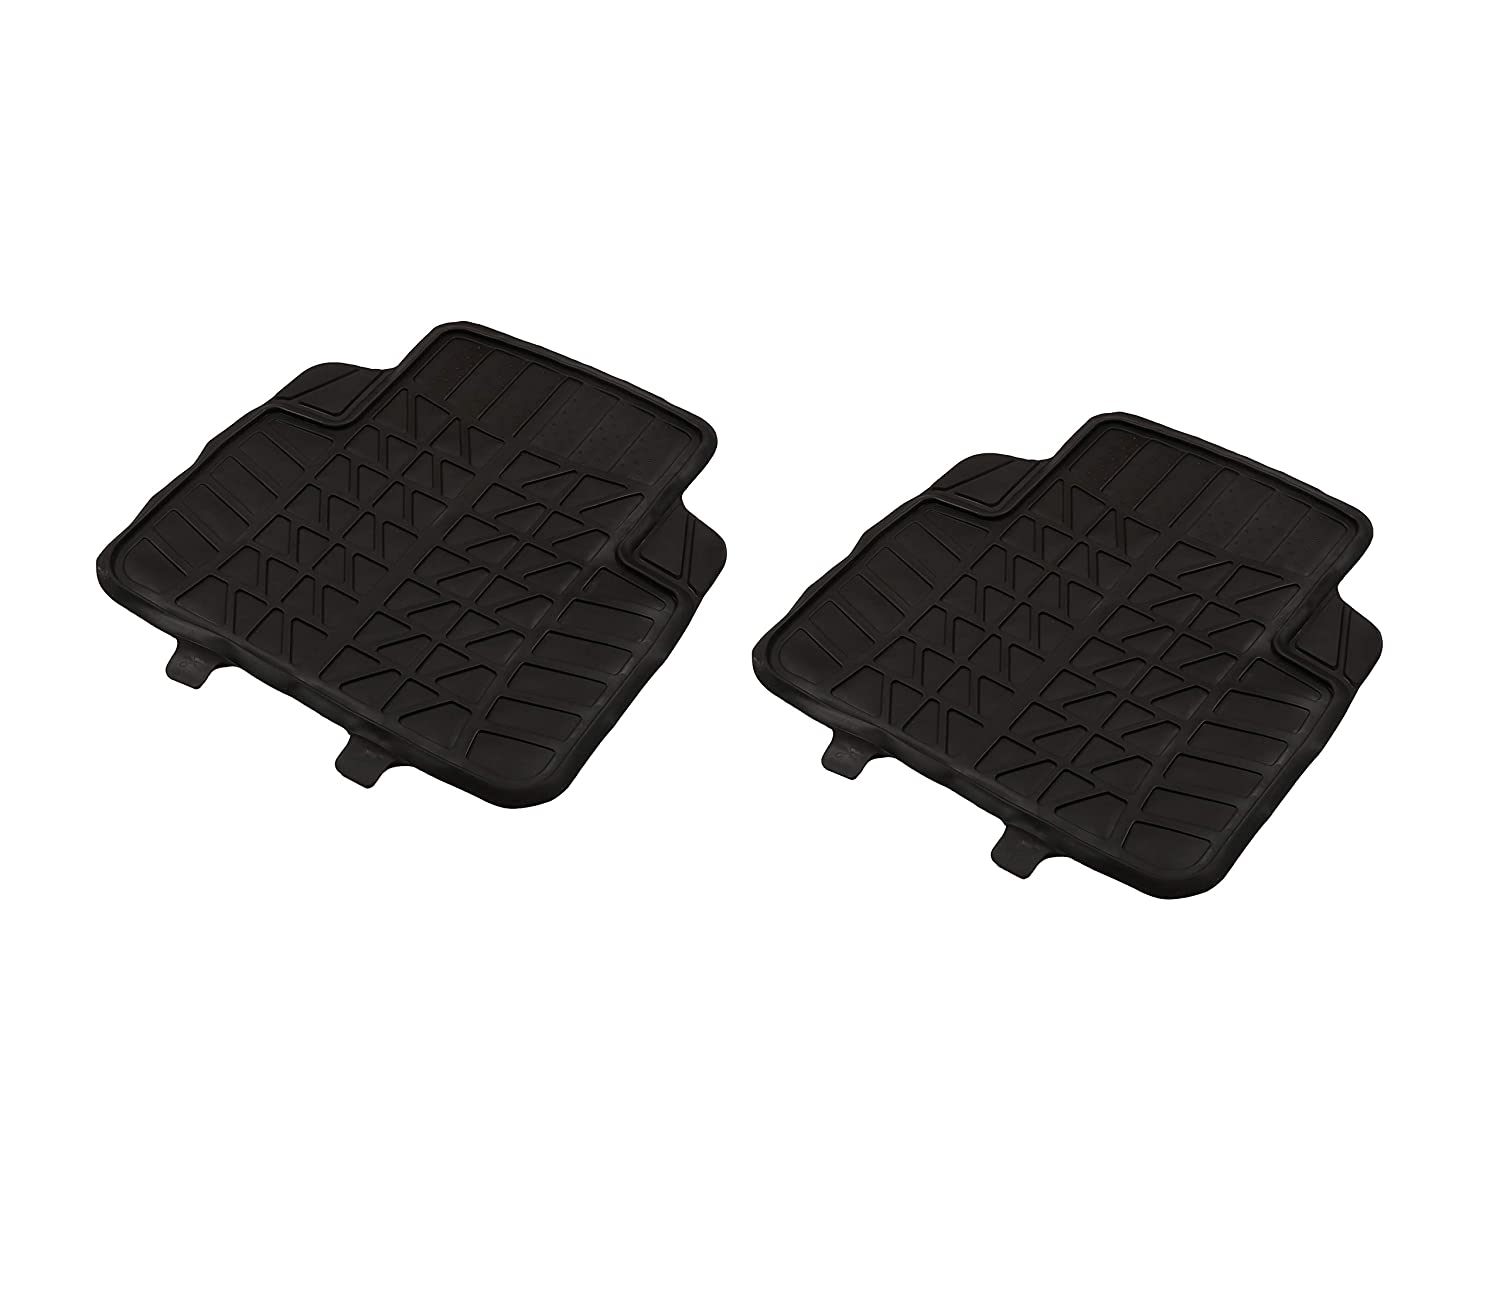 Drivn Universal Car Foot Mat for Ford Figo - (Set of 5)